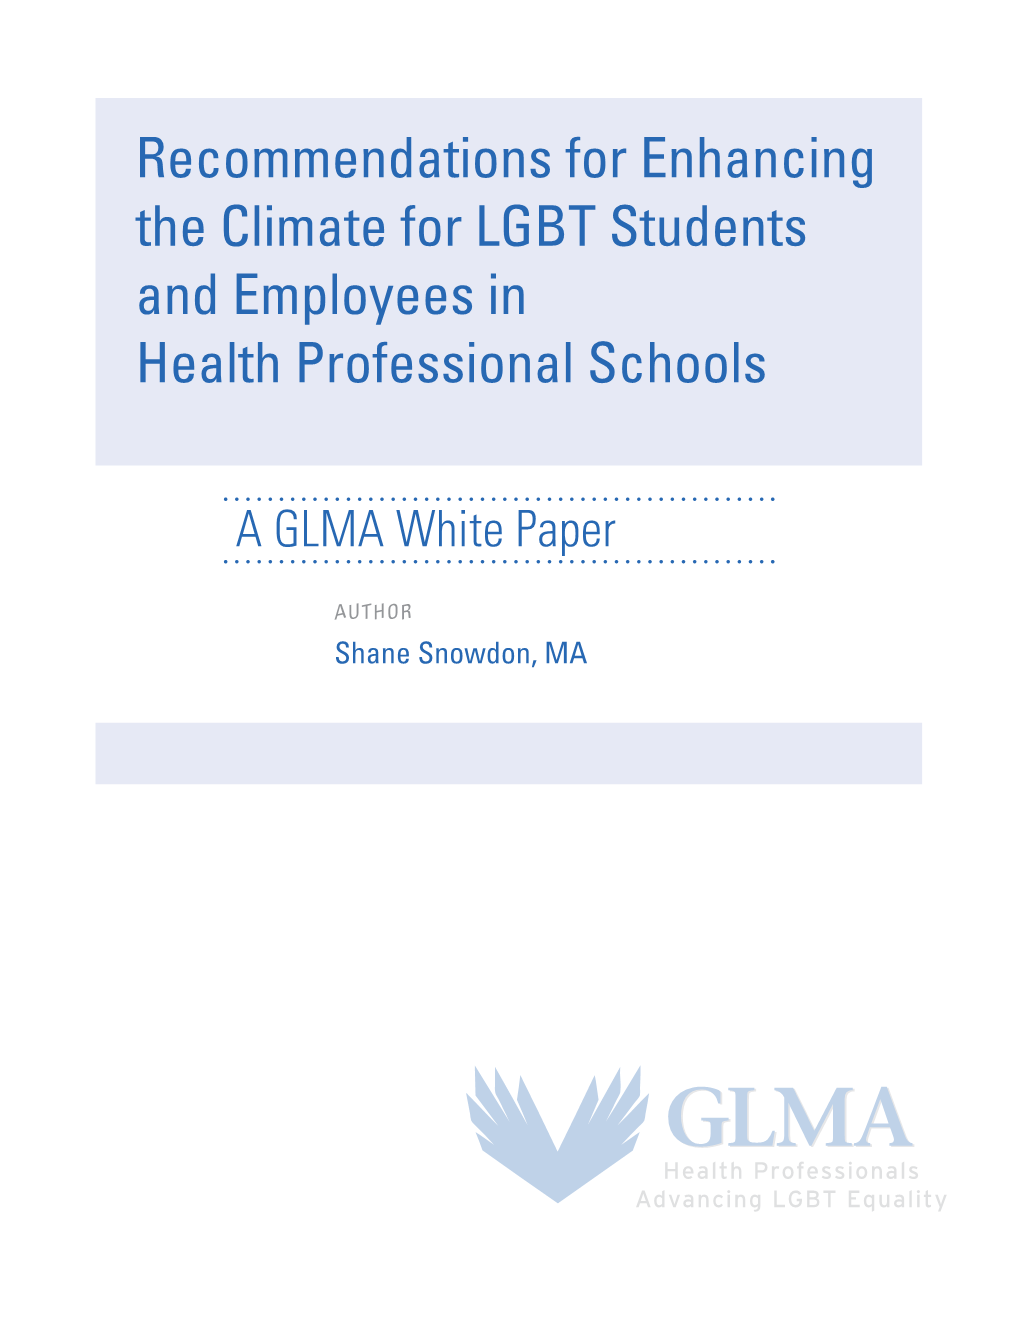 Recommendations for Enhancing the Climate for LGBT Students and Employees in Health Professional Schools